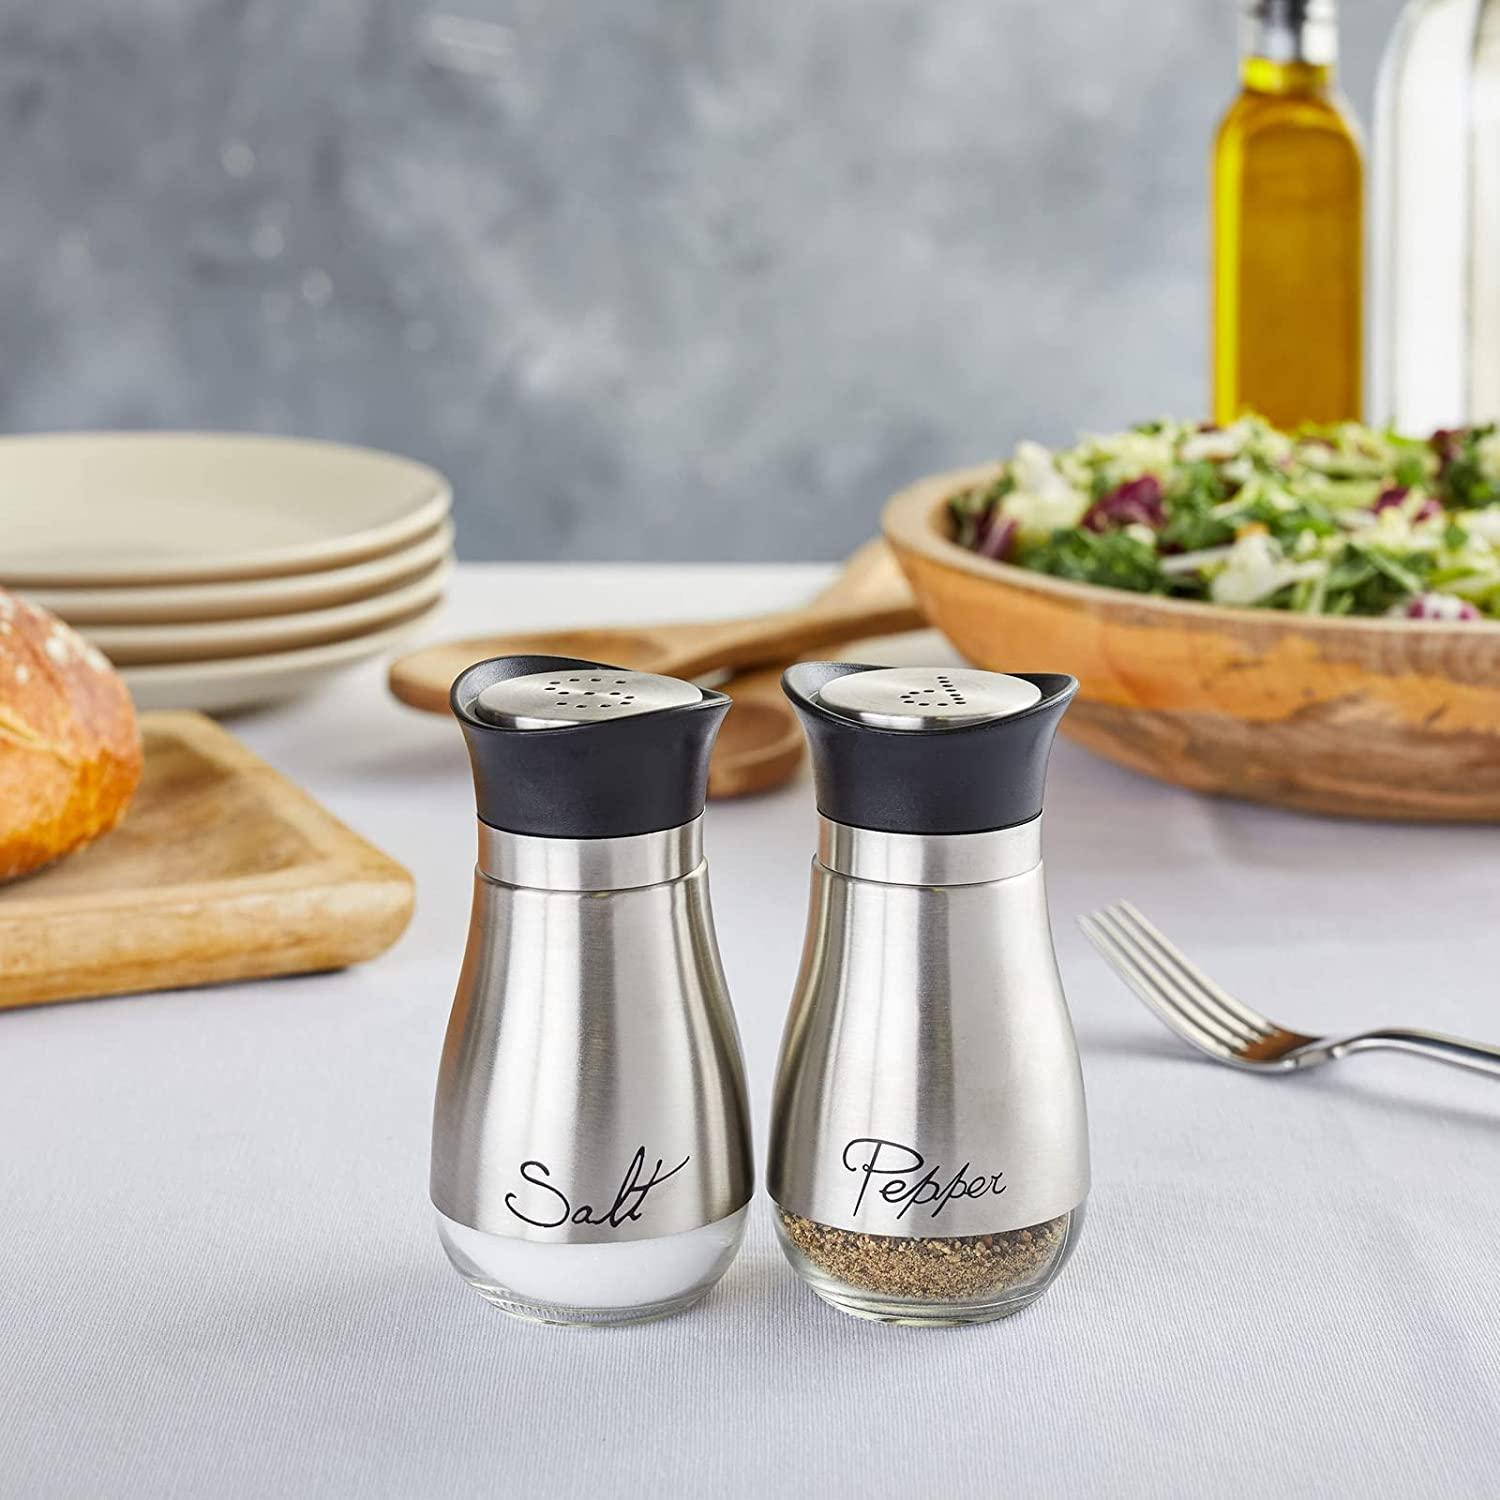 Stainless Steel Salt and Pepper Shakers Set with Glass Bottom, Modern Kitchen Accessories Set (4oz) - Lasercutwraps Shop